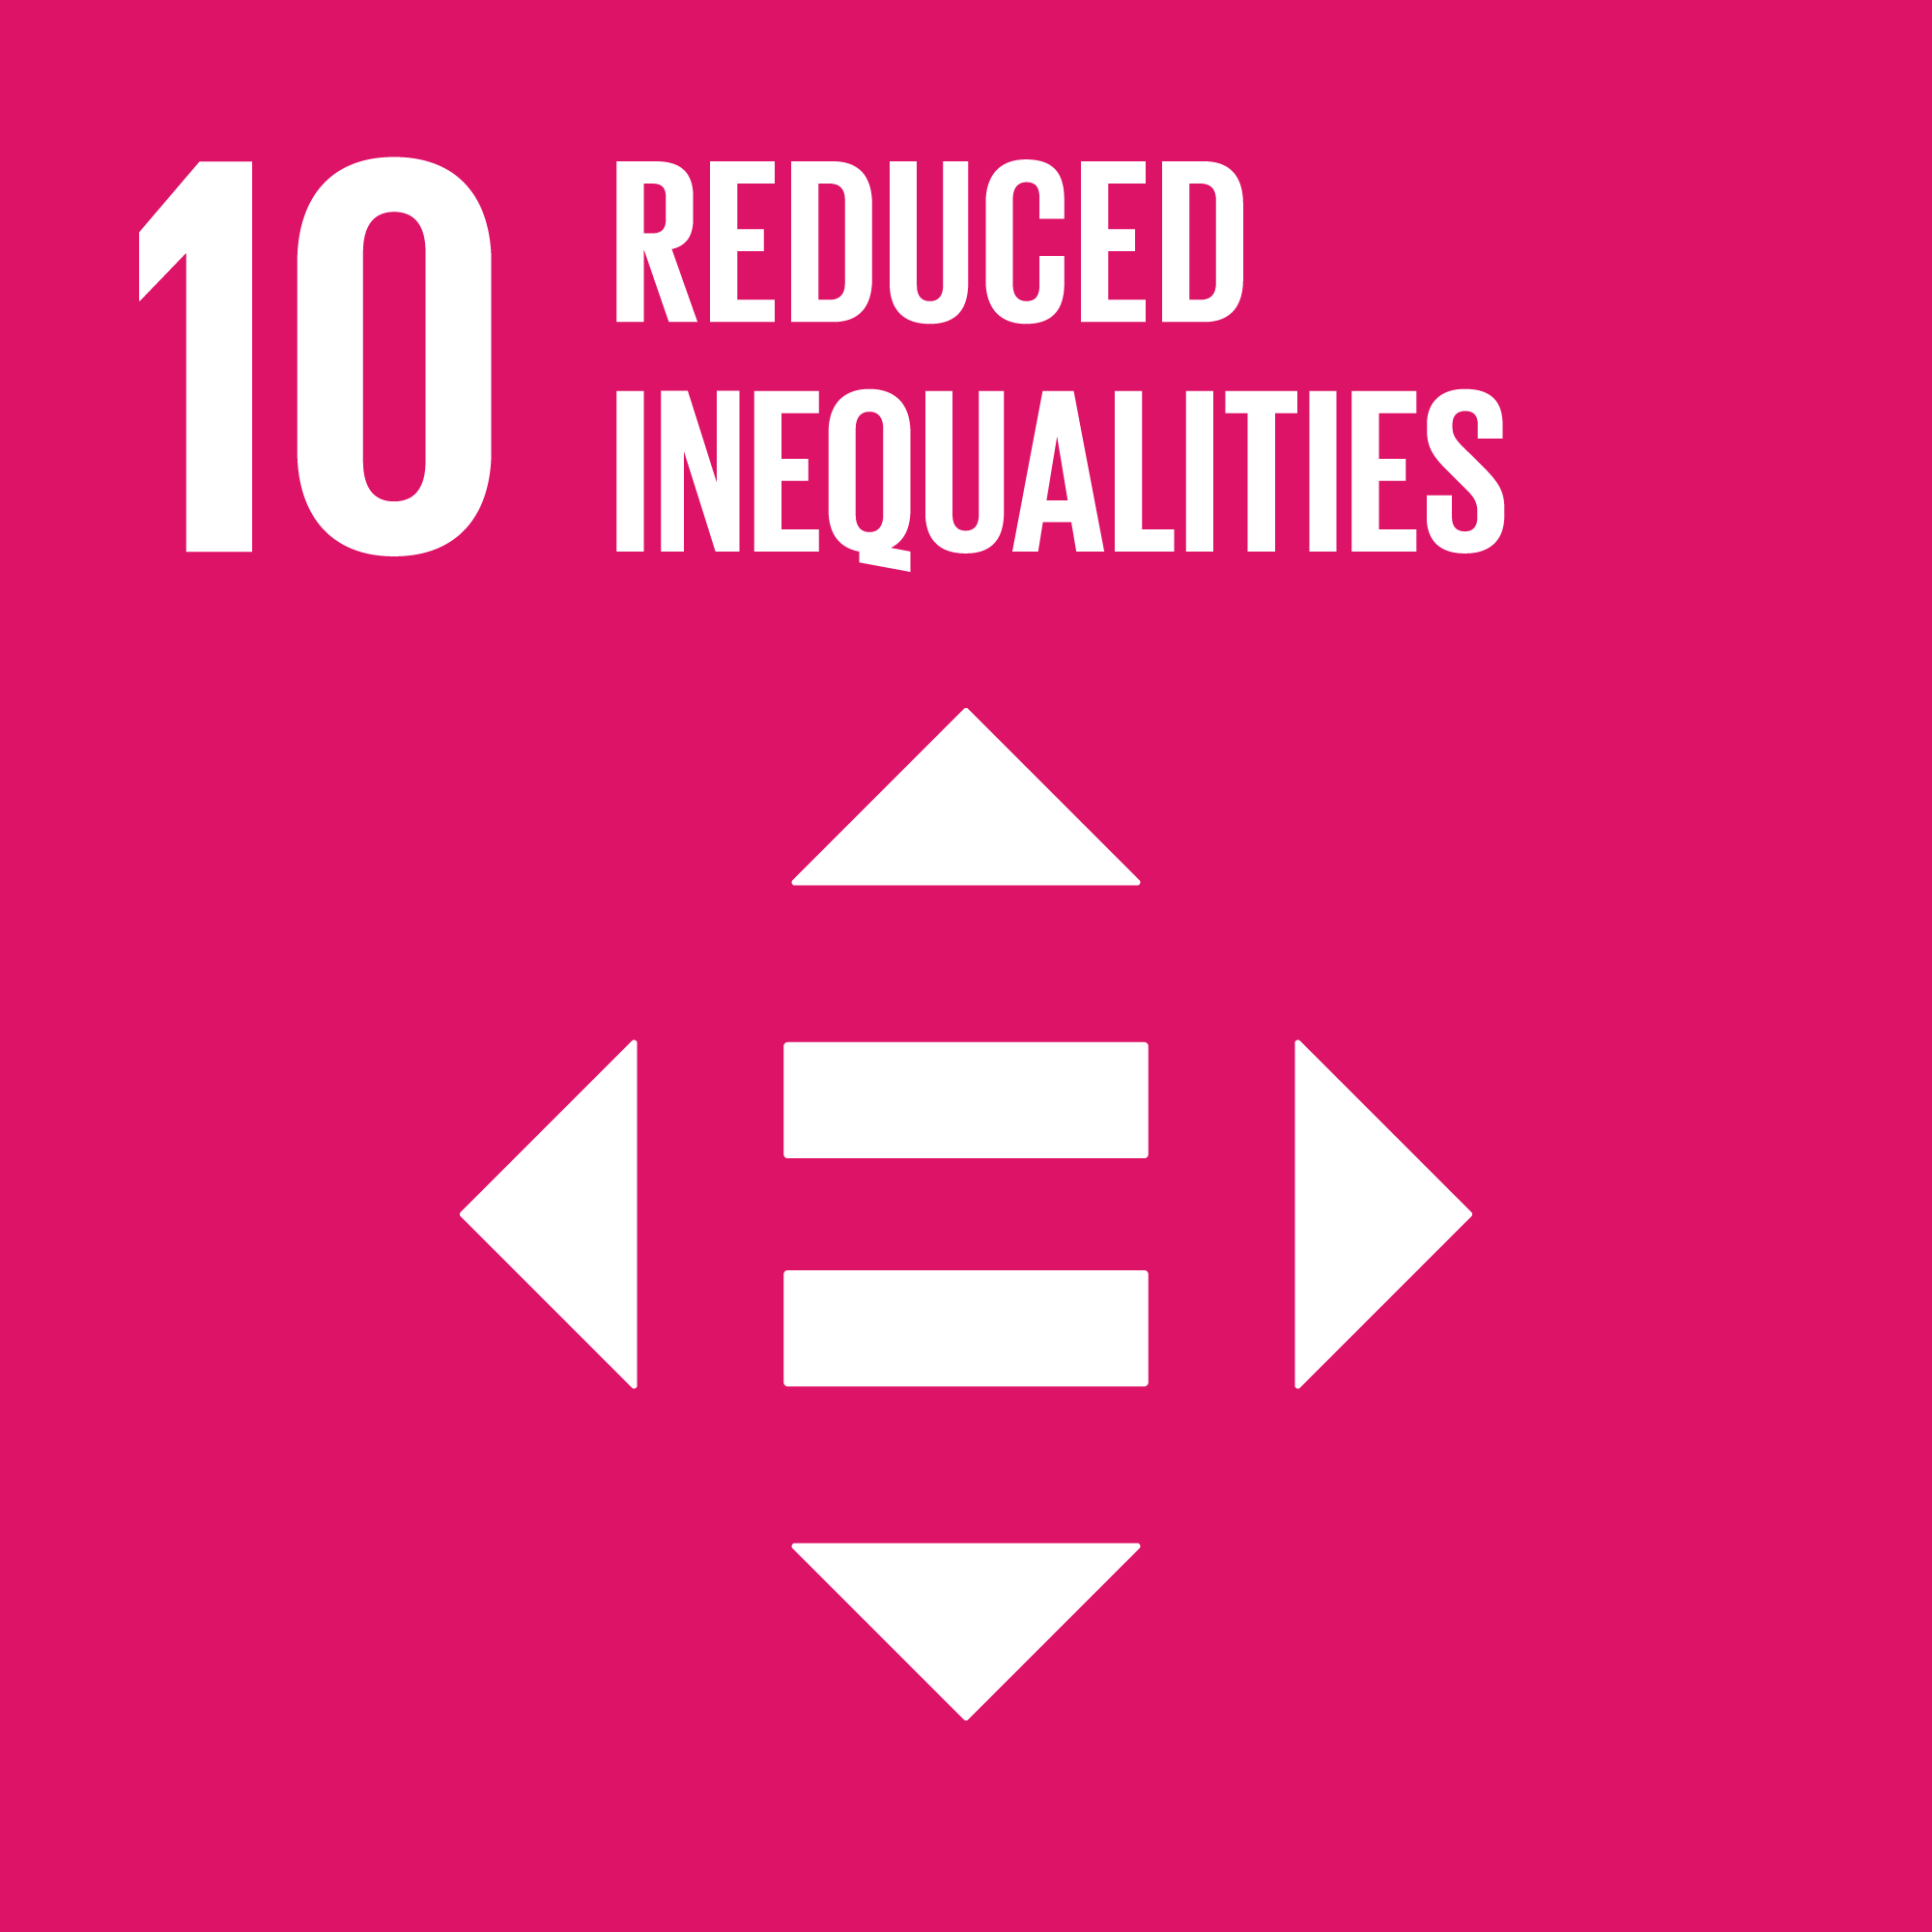 Goal 10: Reduced Inequality - Reduce inequality within and among countries